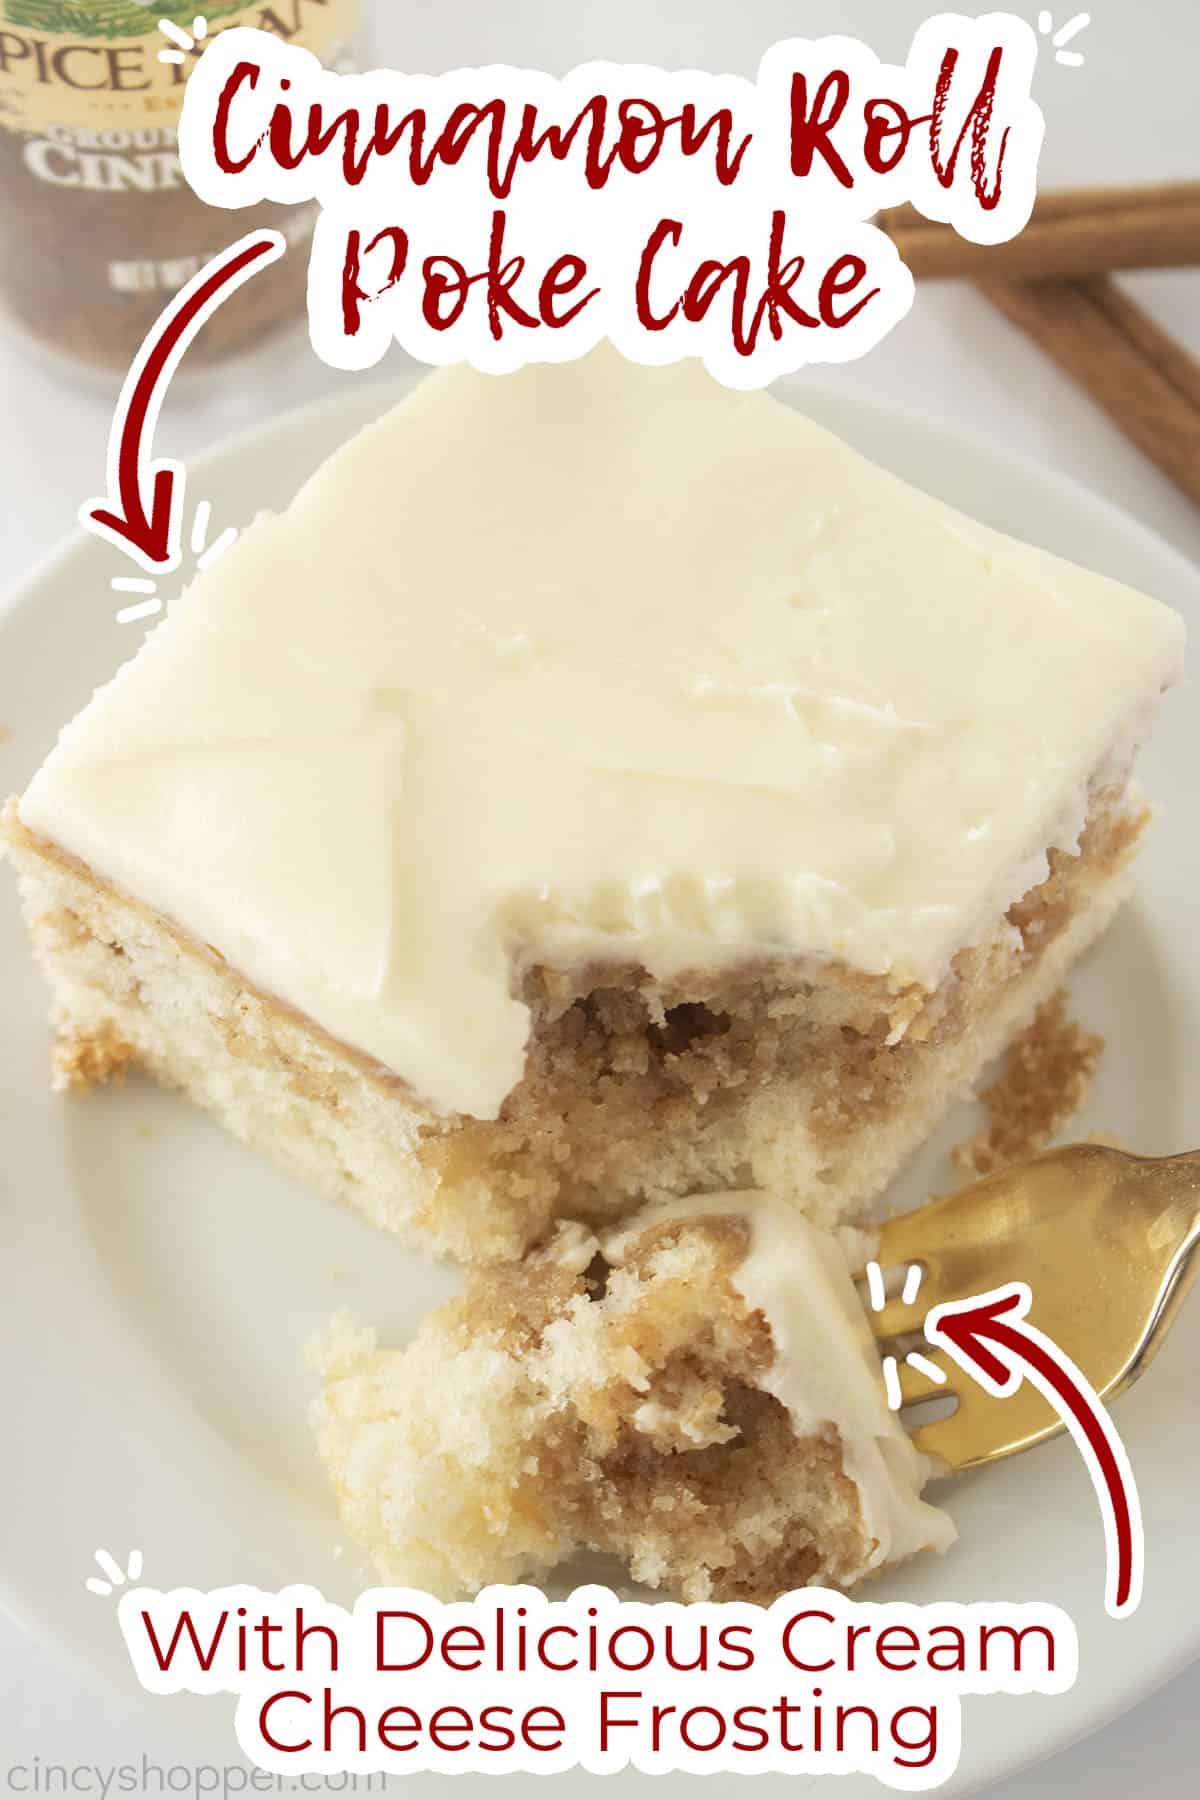 Text on image Cinnamon Roll Poke Cake with delicious cream cheese frosting.